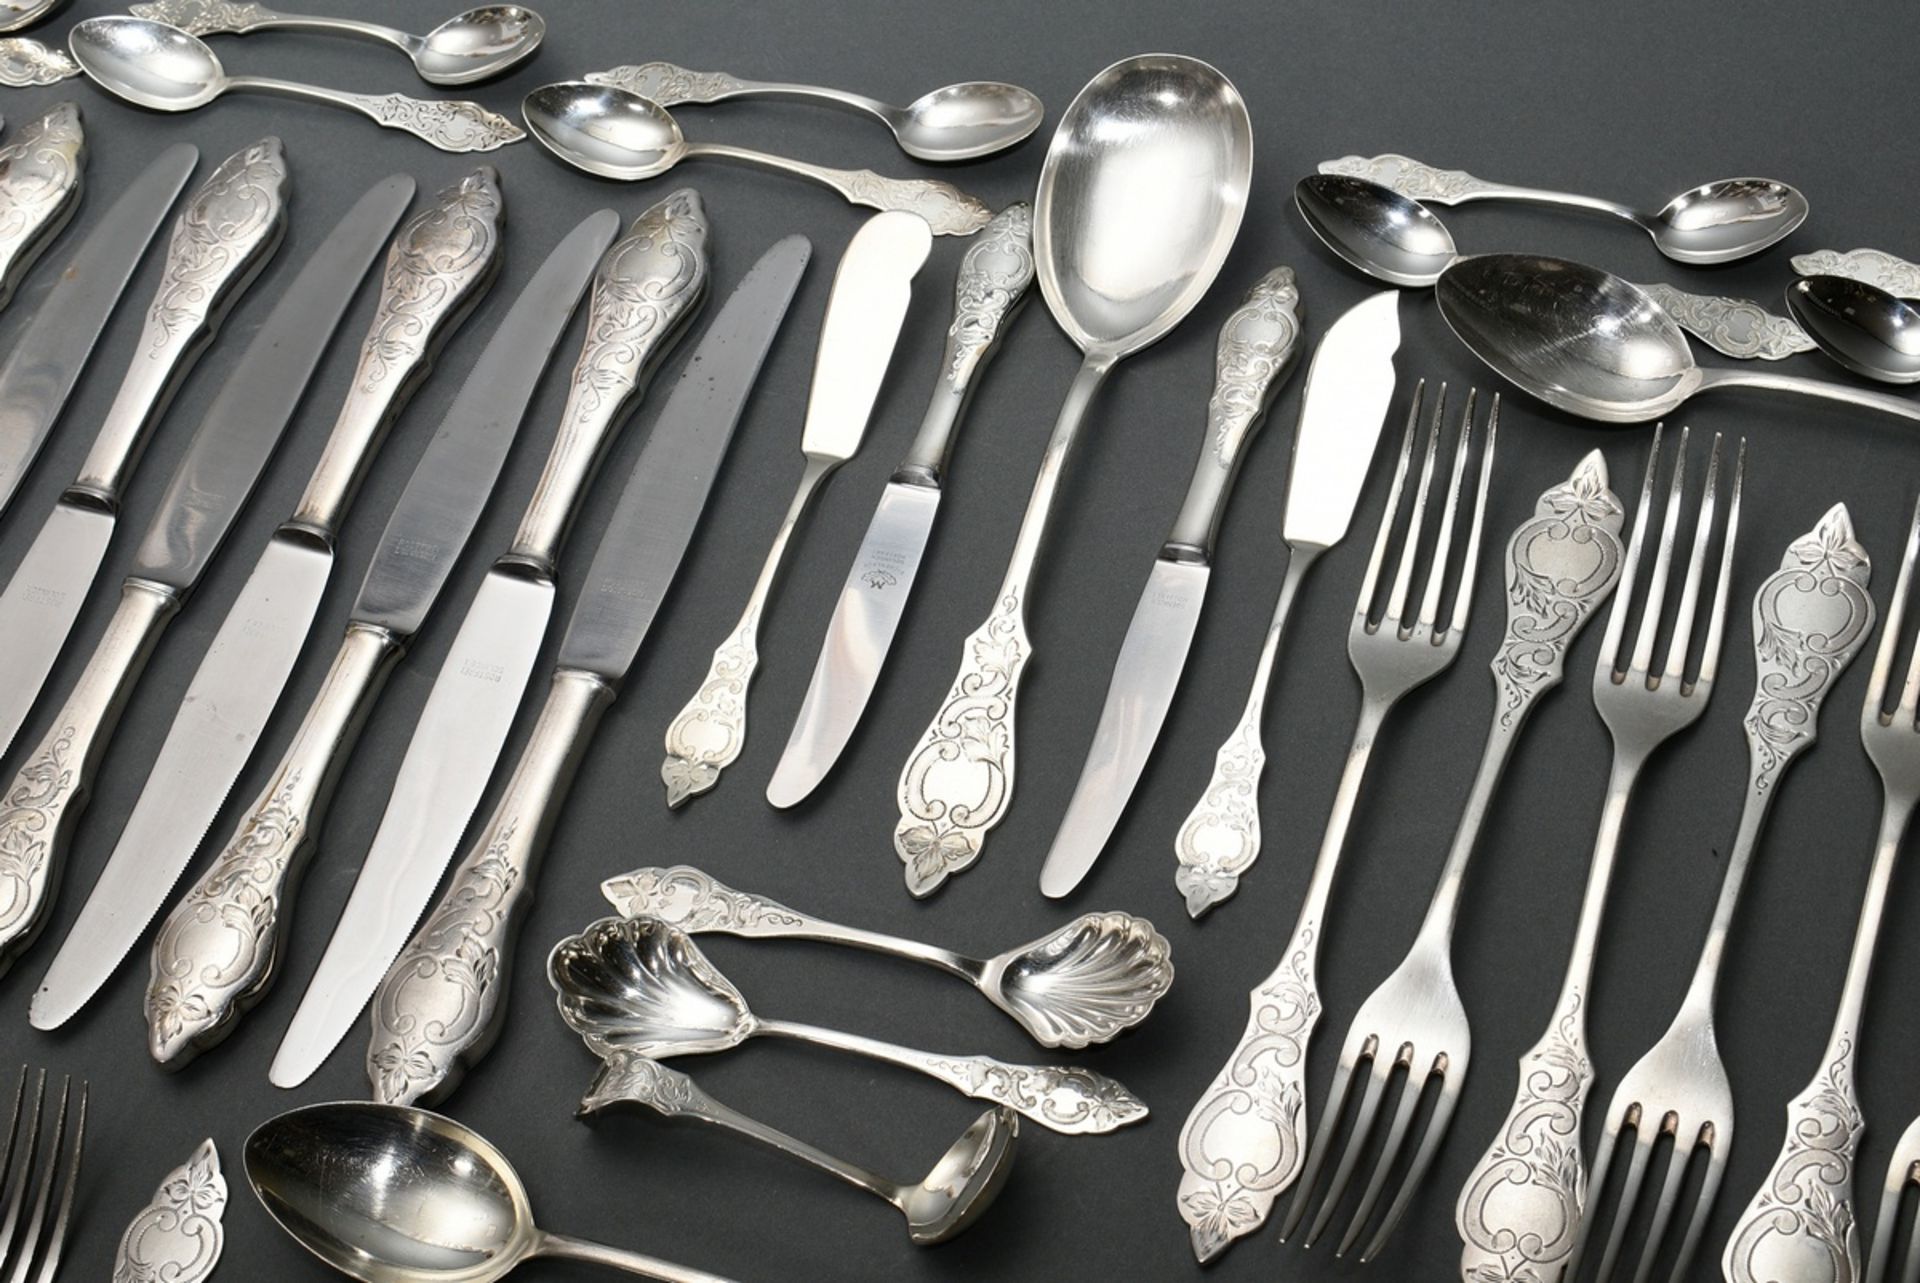 118 pieces Robbe & Berking cutlery ‘Ostfriesenmuster’, silver 800, 2182g (without knives), consisti - Image 3 of 12